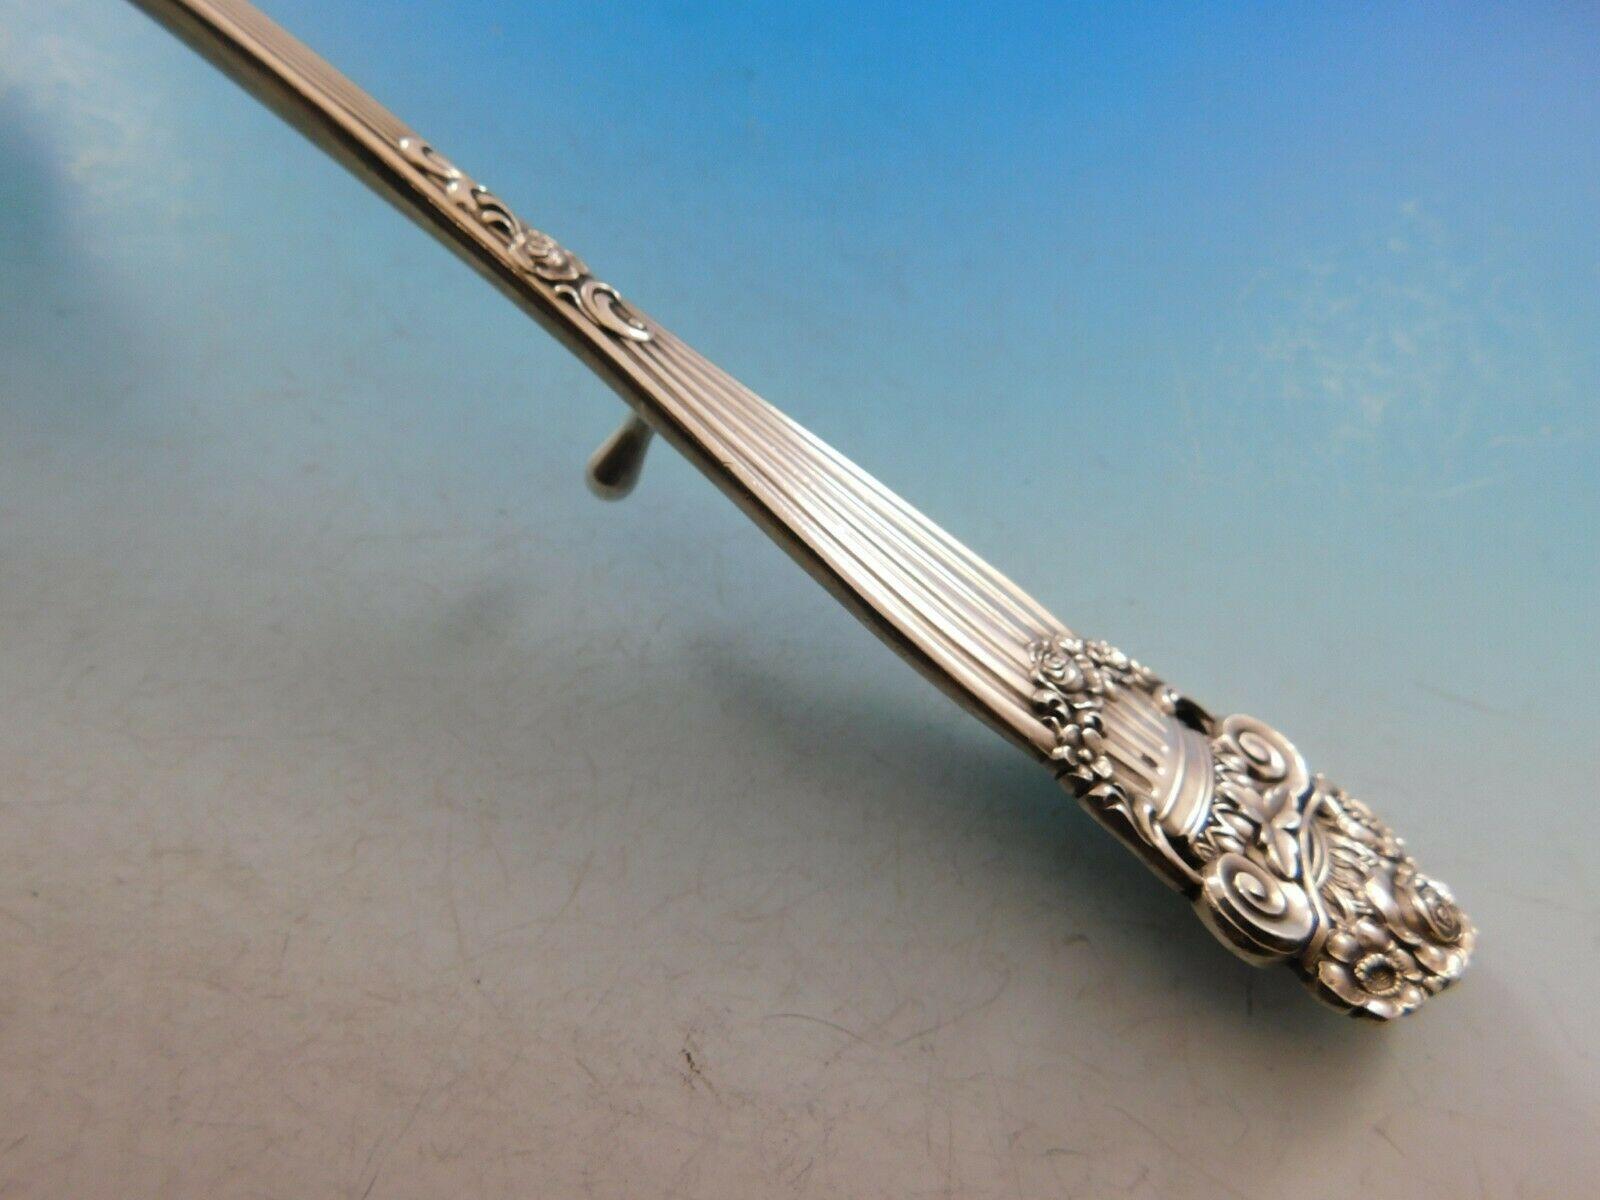 Georgian by Towle

The Georgian flatware pattern displays a cornucopia design of flowers and columns, reminiscent of the prosperity during the reign of King George V of Great Britain. Roses are evident throughout the handle, from top to bottom,